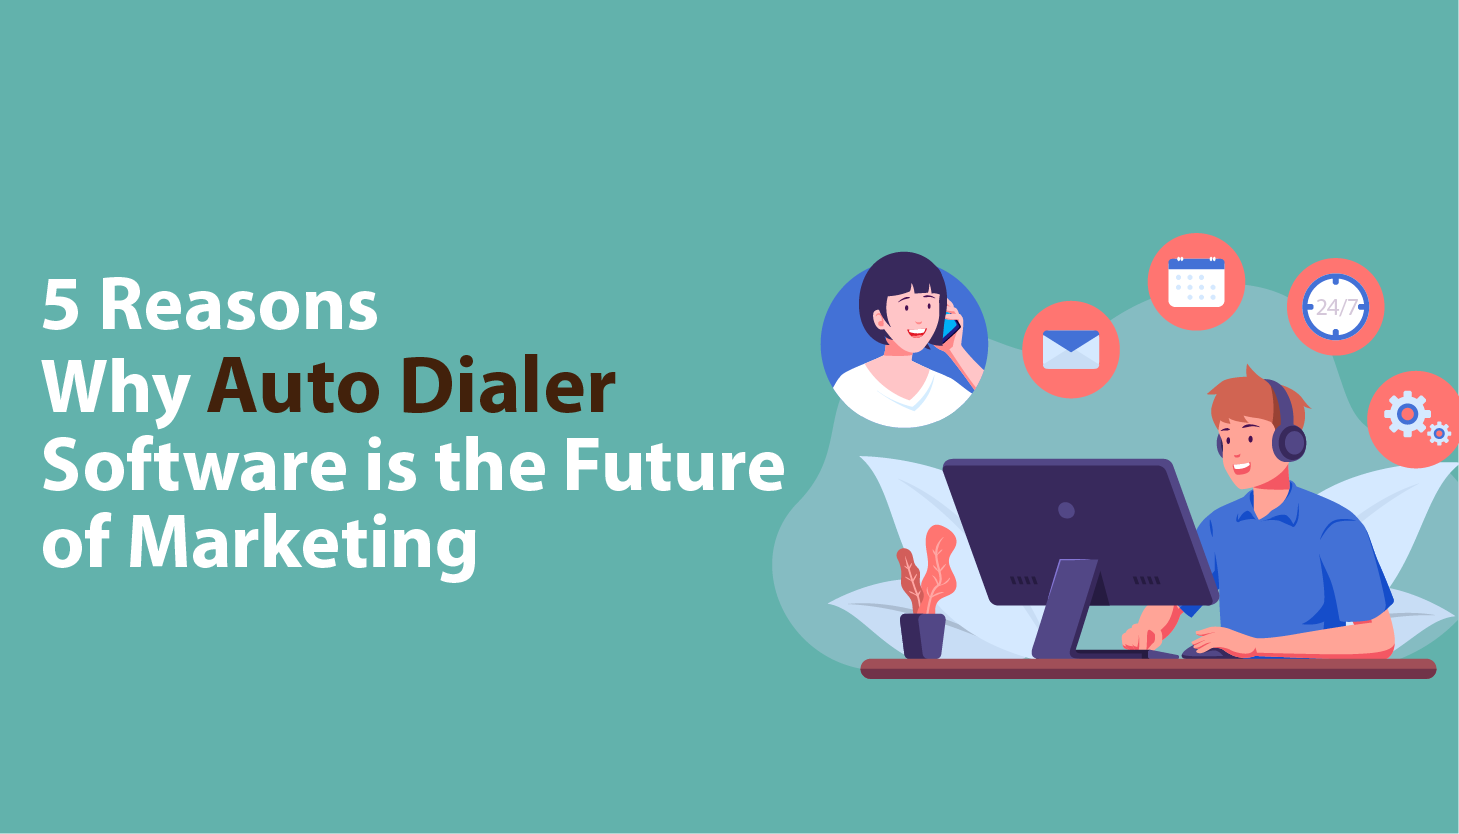  5 Reasons Why Auto Dialer Software is the Future of Marketing